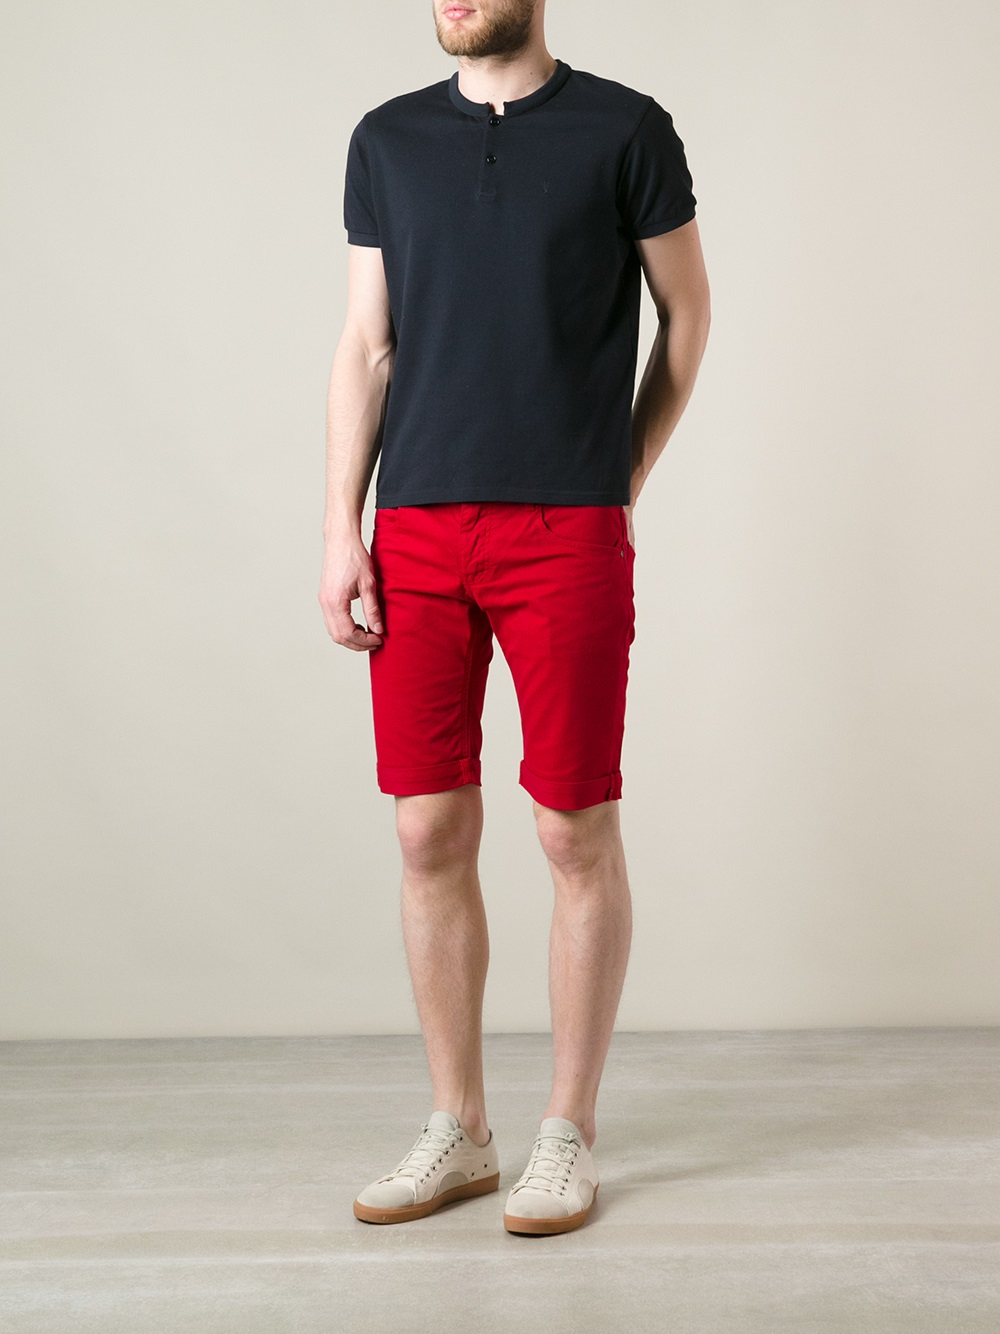 Armani Jeans Denim Shorts in Red for Men - Lyst